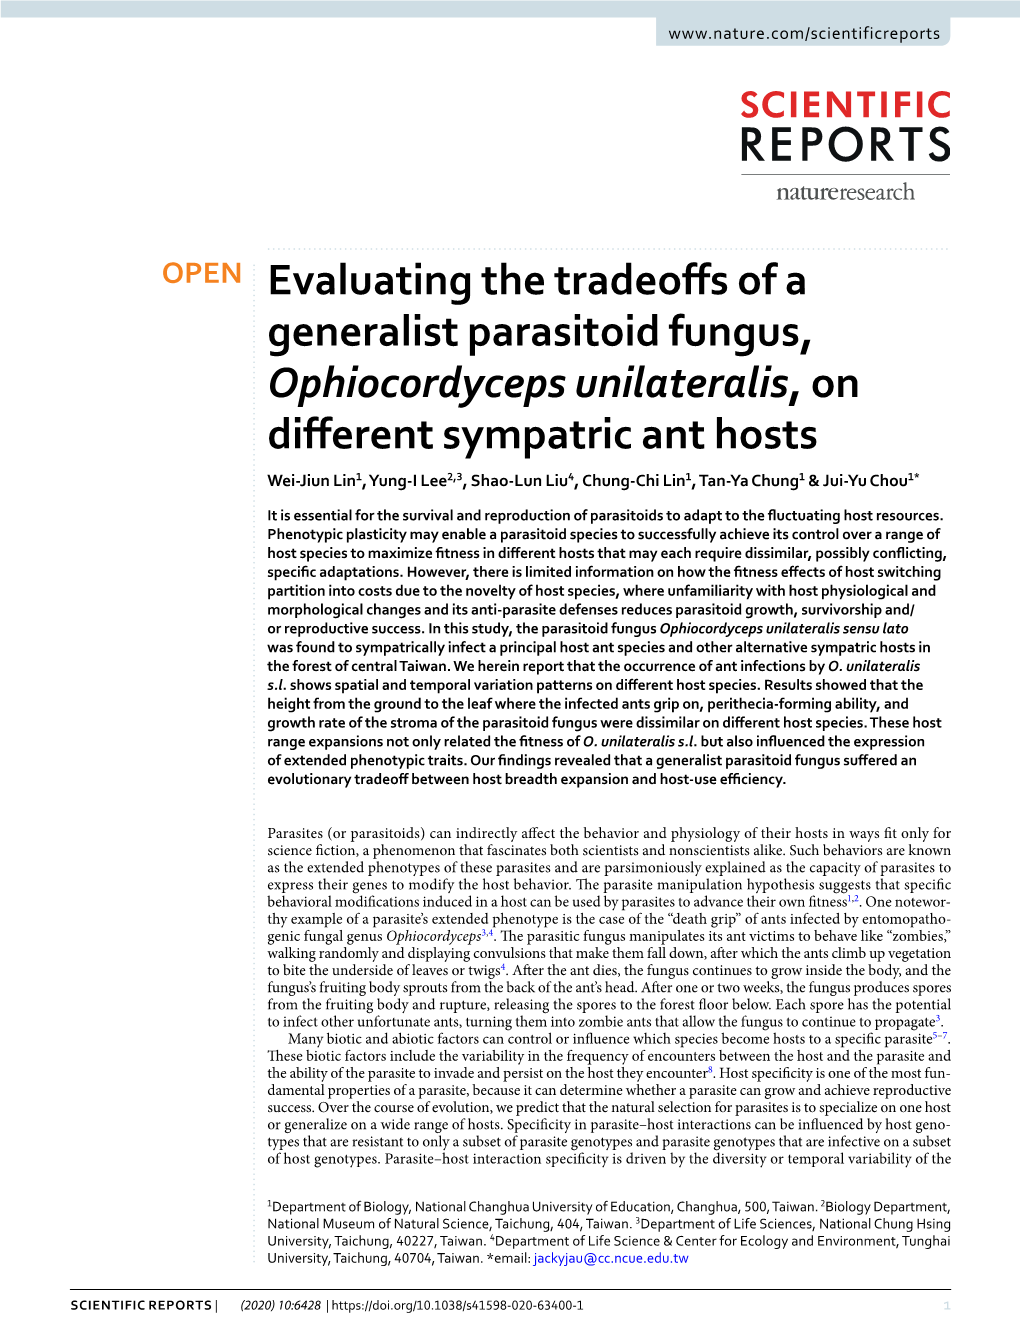 Evaluating the Tradeoffs of a Generalist Parasitoid Fungus, Ophiocordyceps